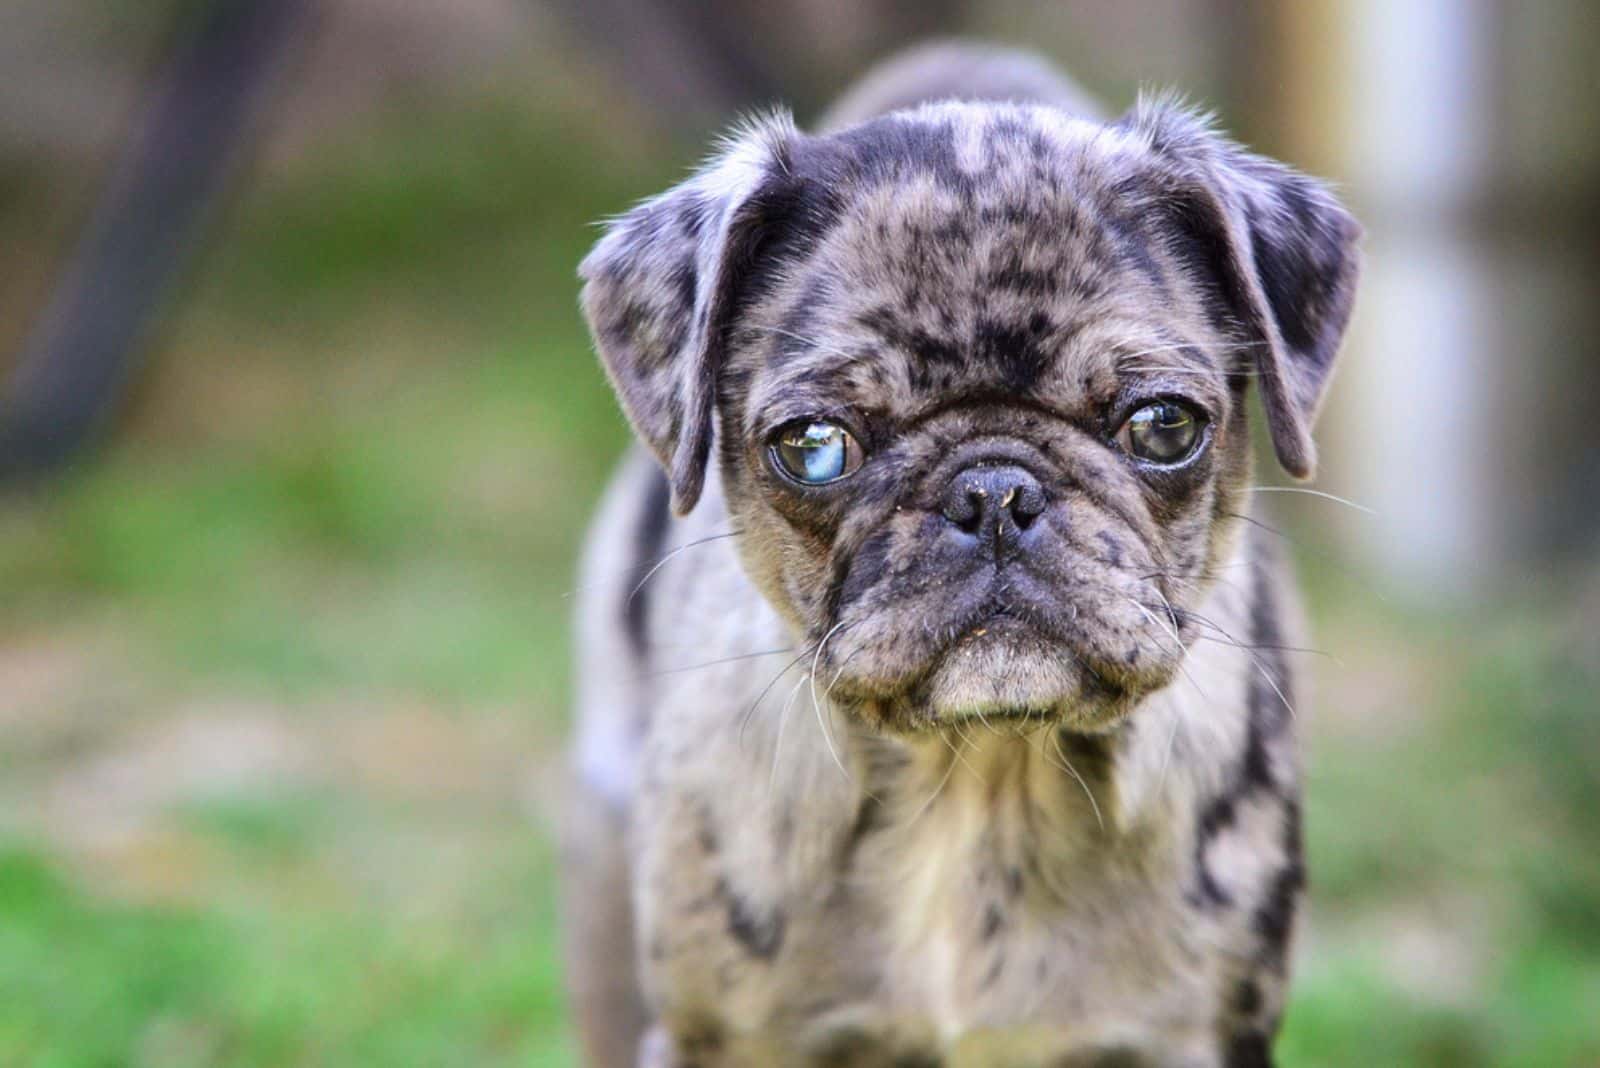 merle pug with one blue eye keeping a look out